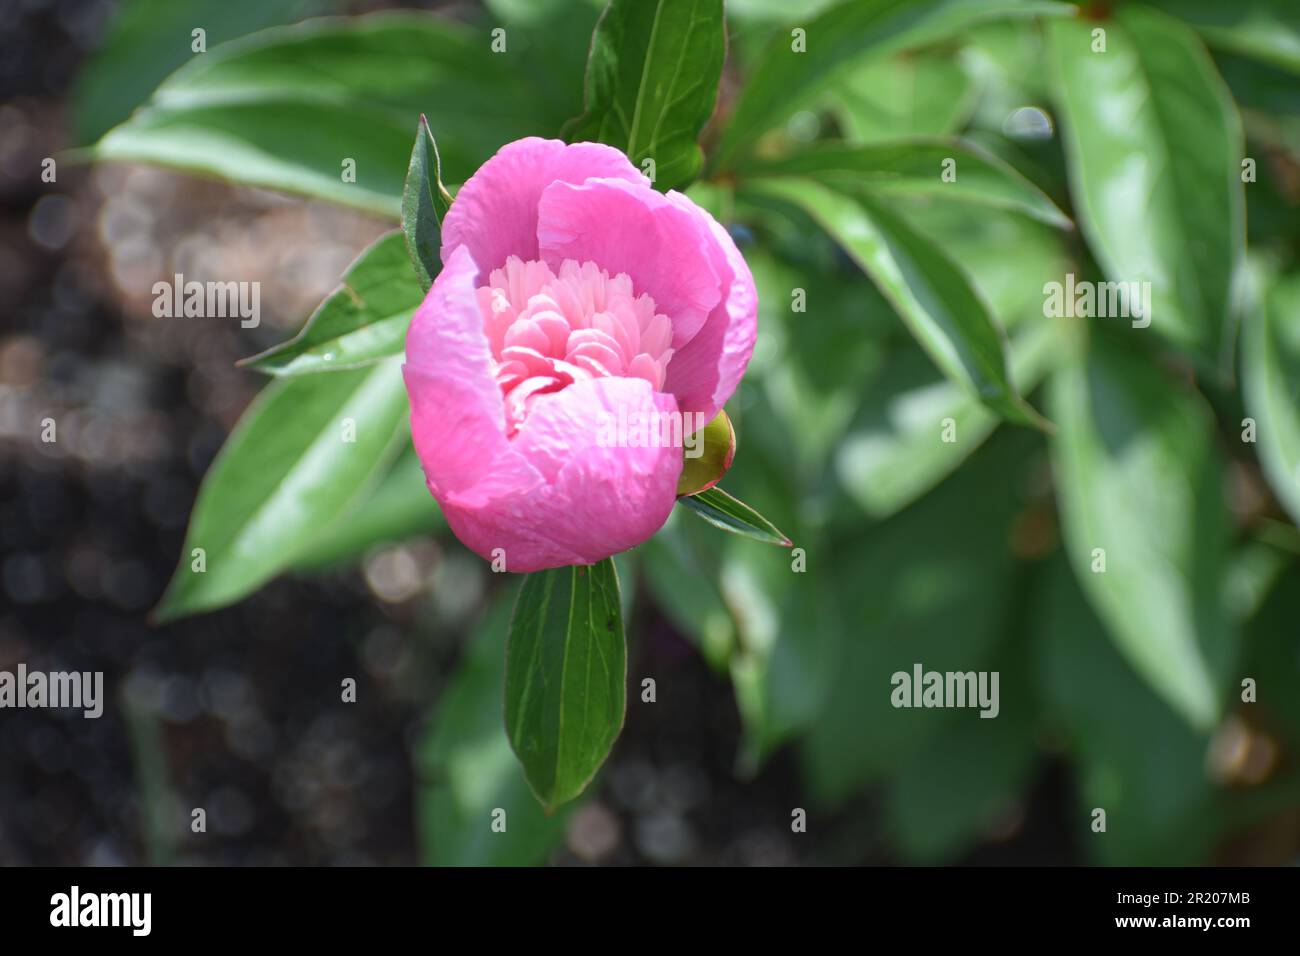 A pink peony, Paeonia officinalis, with blooms partially opened. Stock Photo